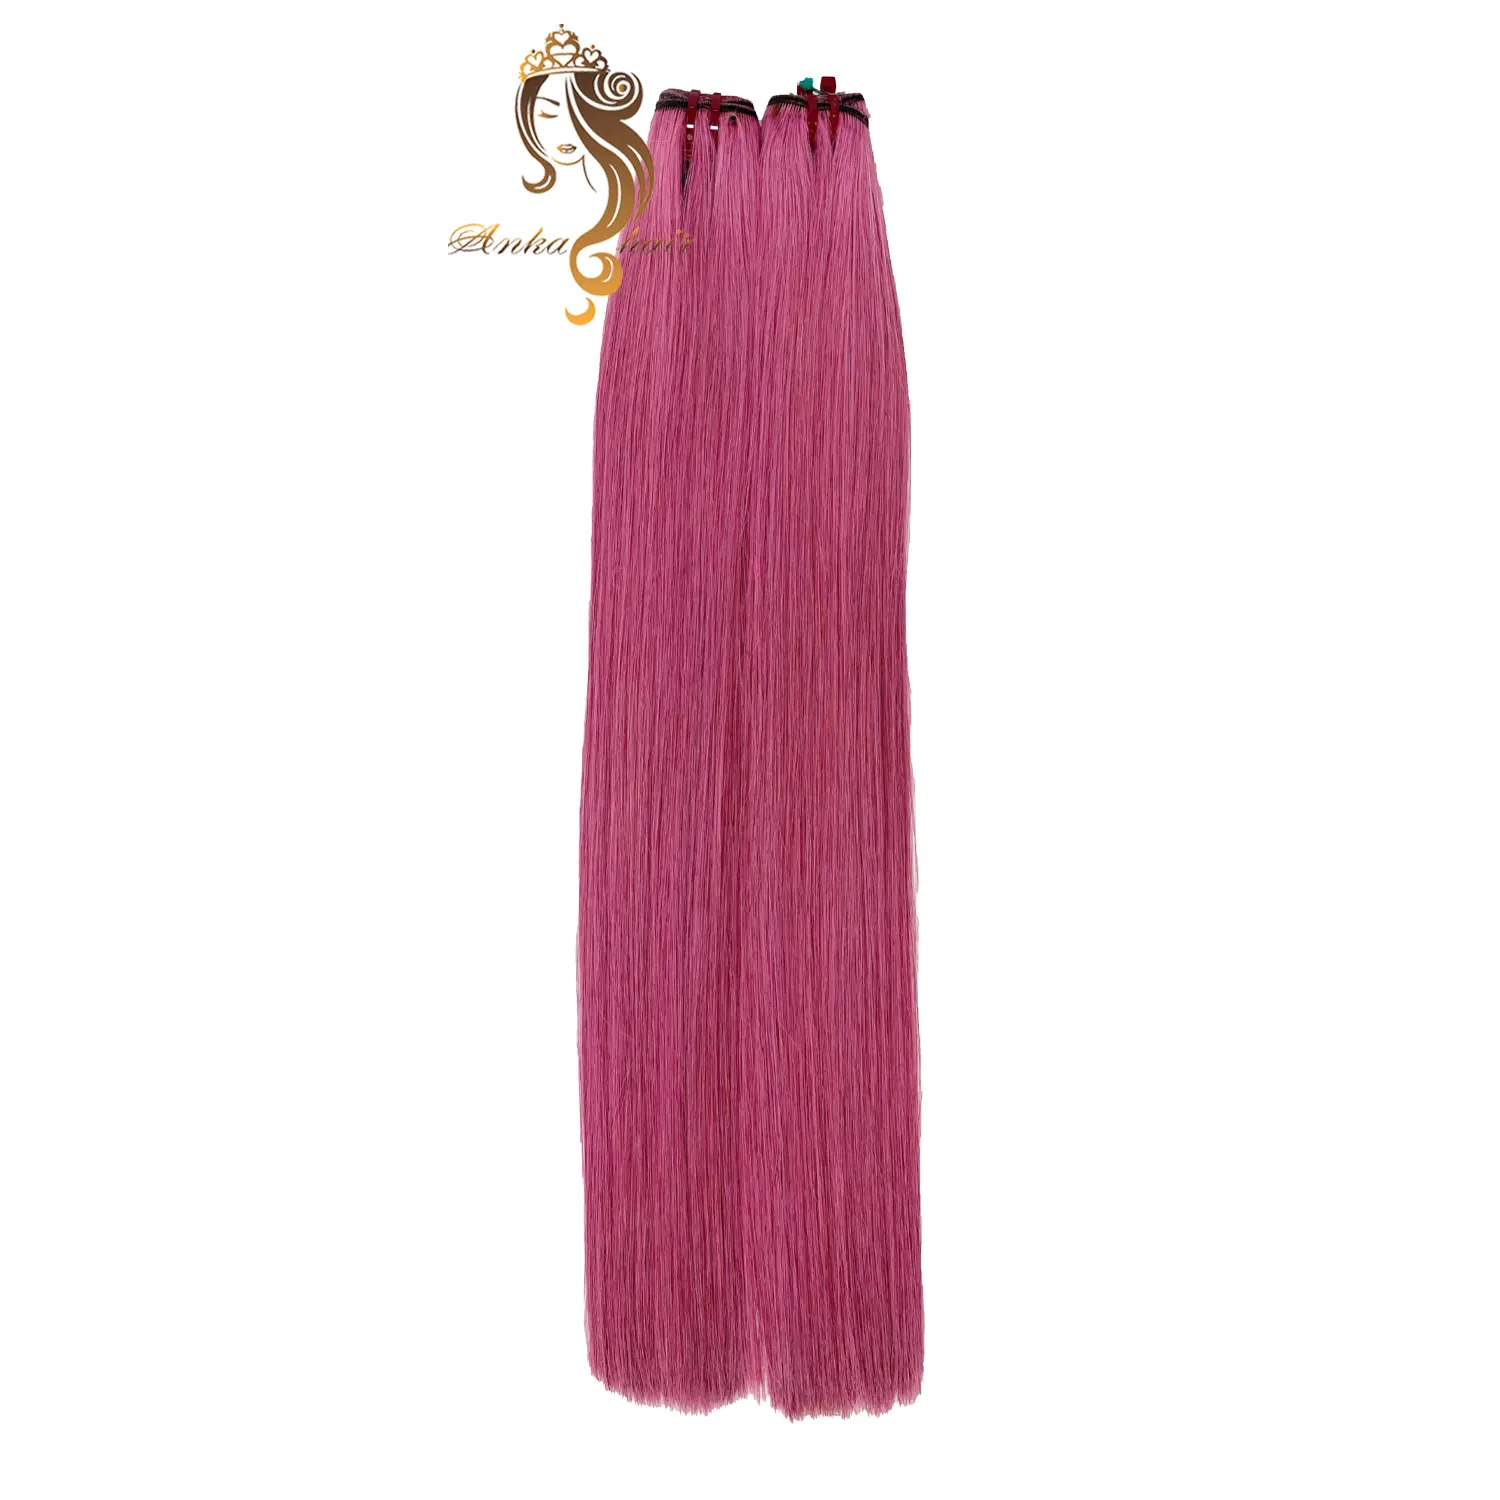 Wholesale Price, Best Seller Bright Lovely Color Pink Collection DHL UPS Fedex Weft Hair Extension From Anka Hair